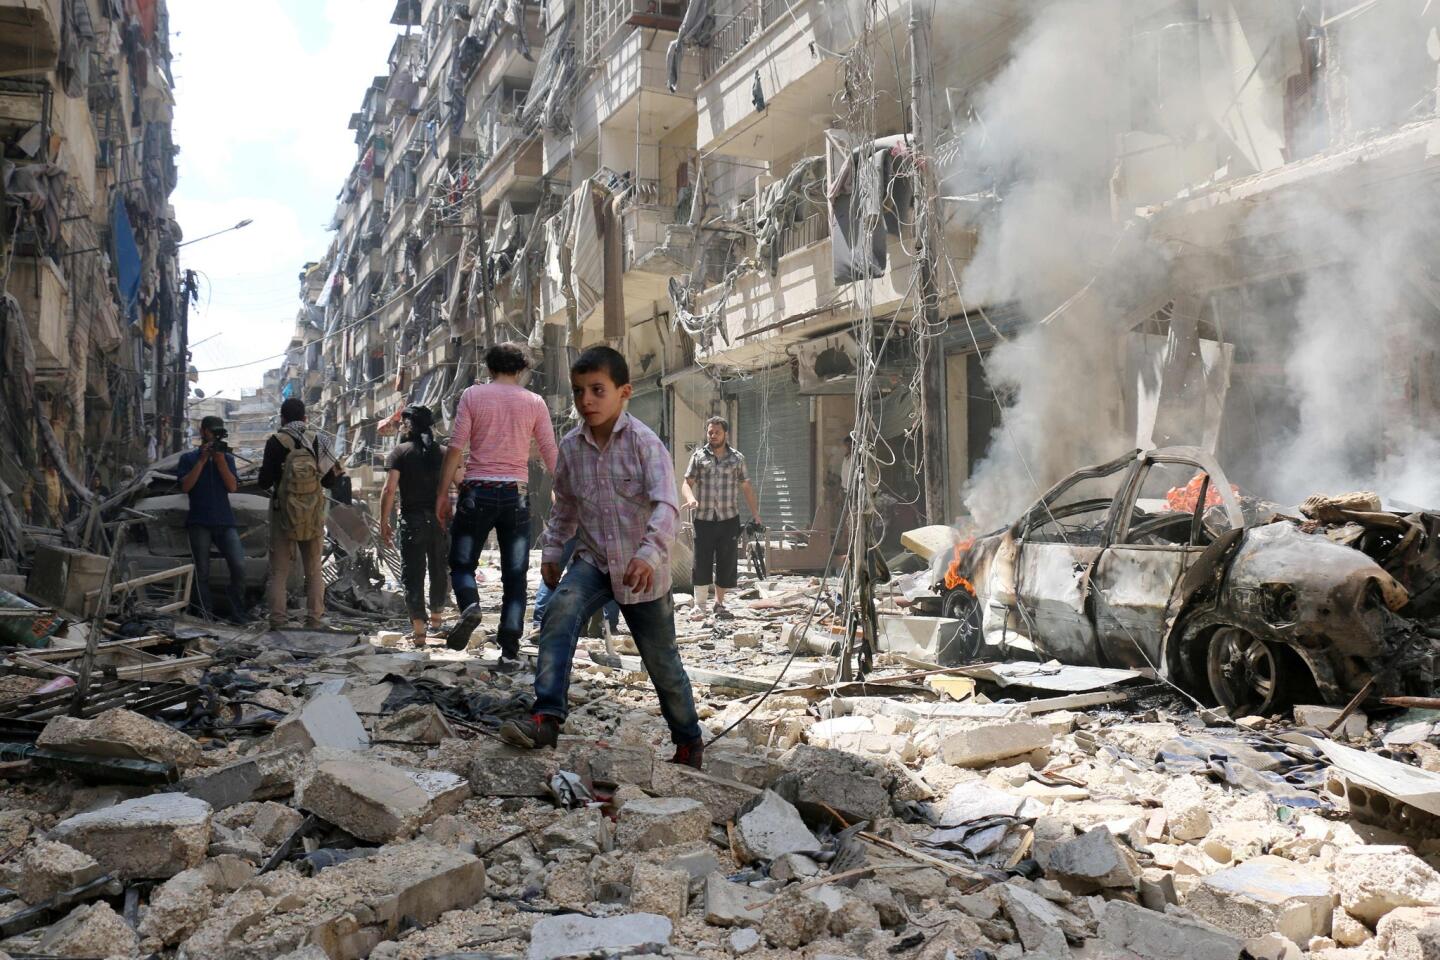 People walk amid the rubble of destroyed buildings following a reported air strike on the rebel-held neighbourhood of al-Kalasa in the northern Syrian city of Aleppo, on April 28, 2016.